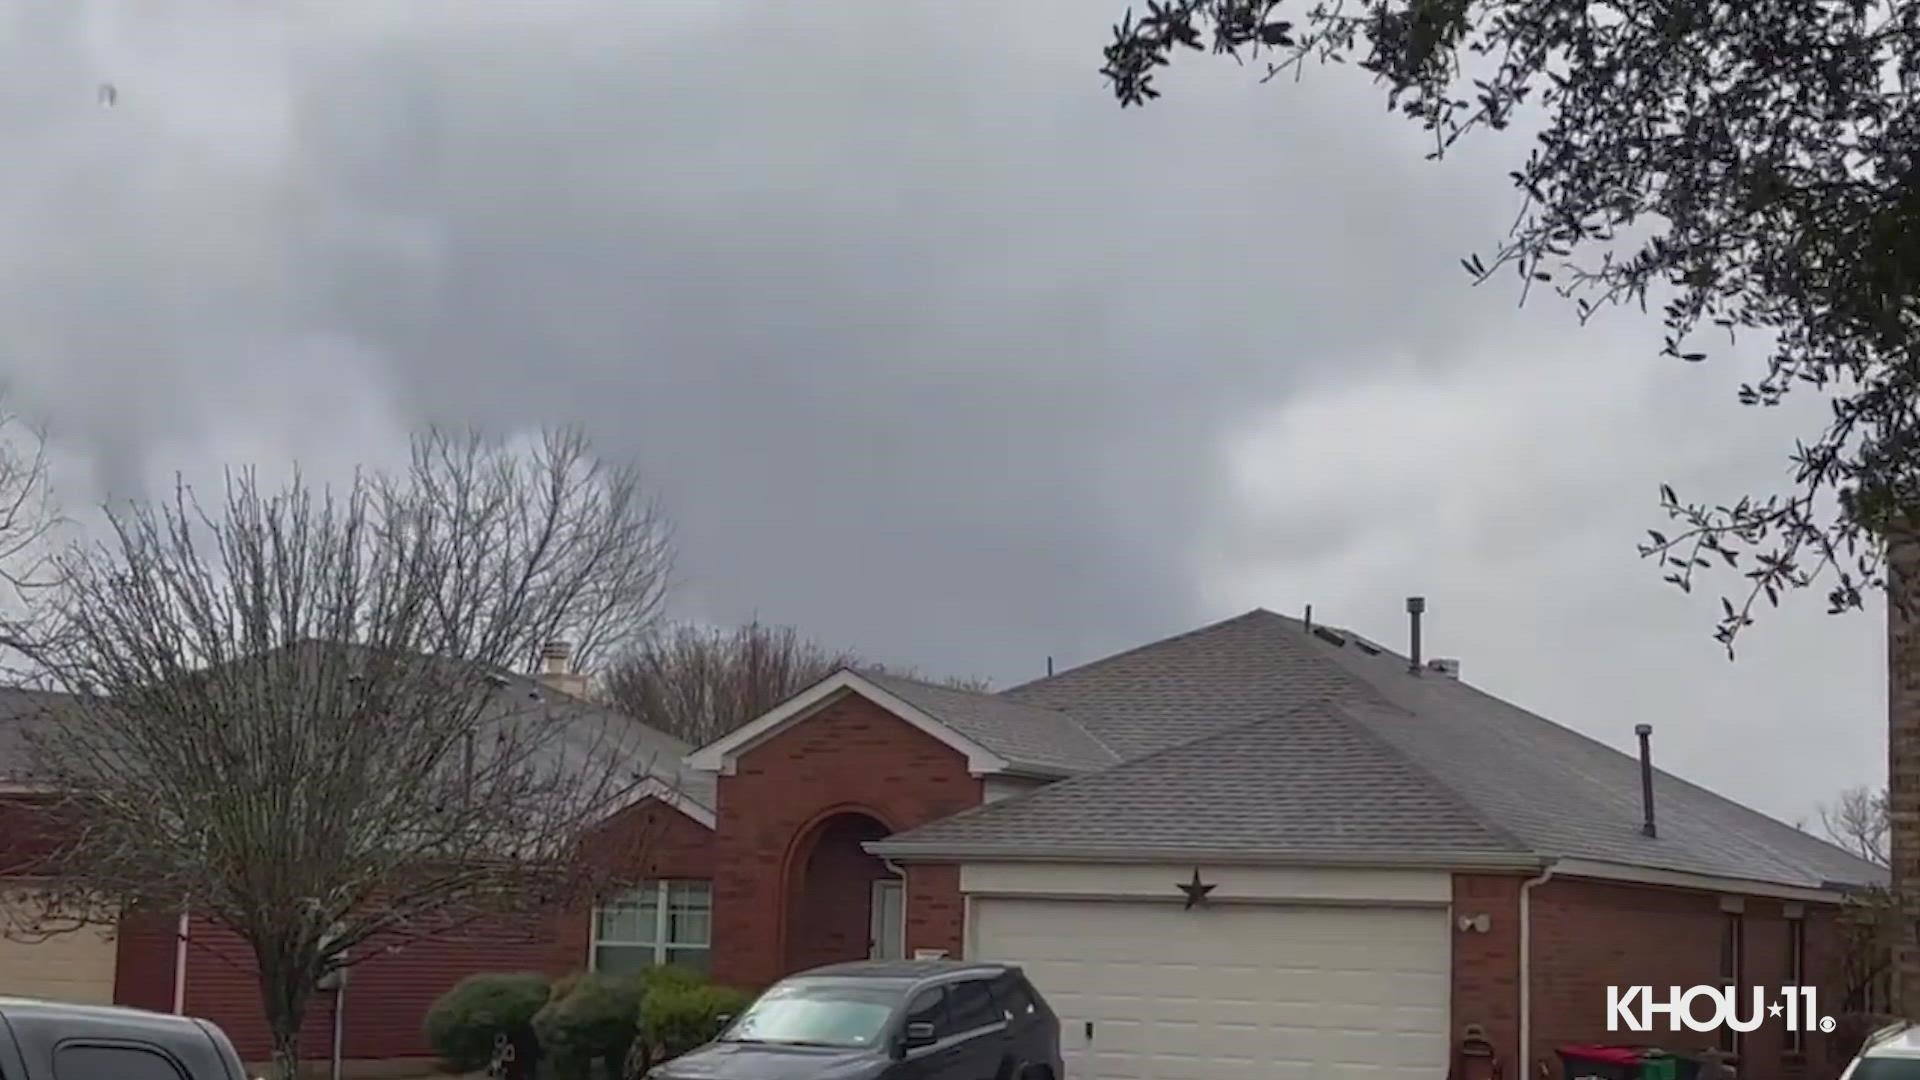 Meteorologist Tim Pandajis breaks down what's believed to be the EF3 torando that touched down on Tuesday.